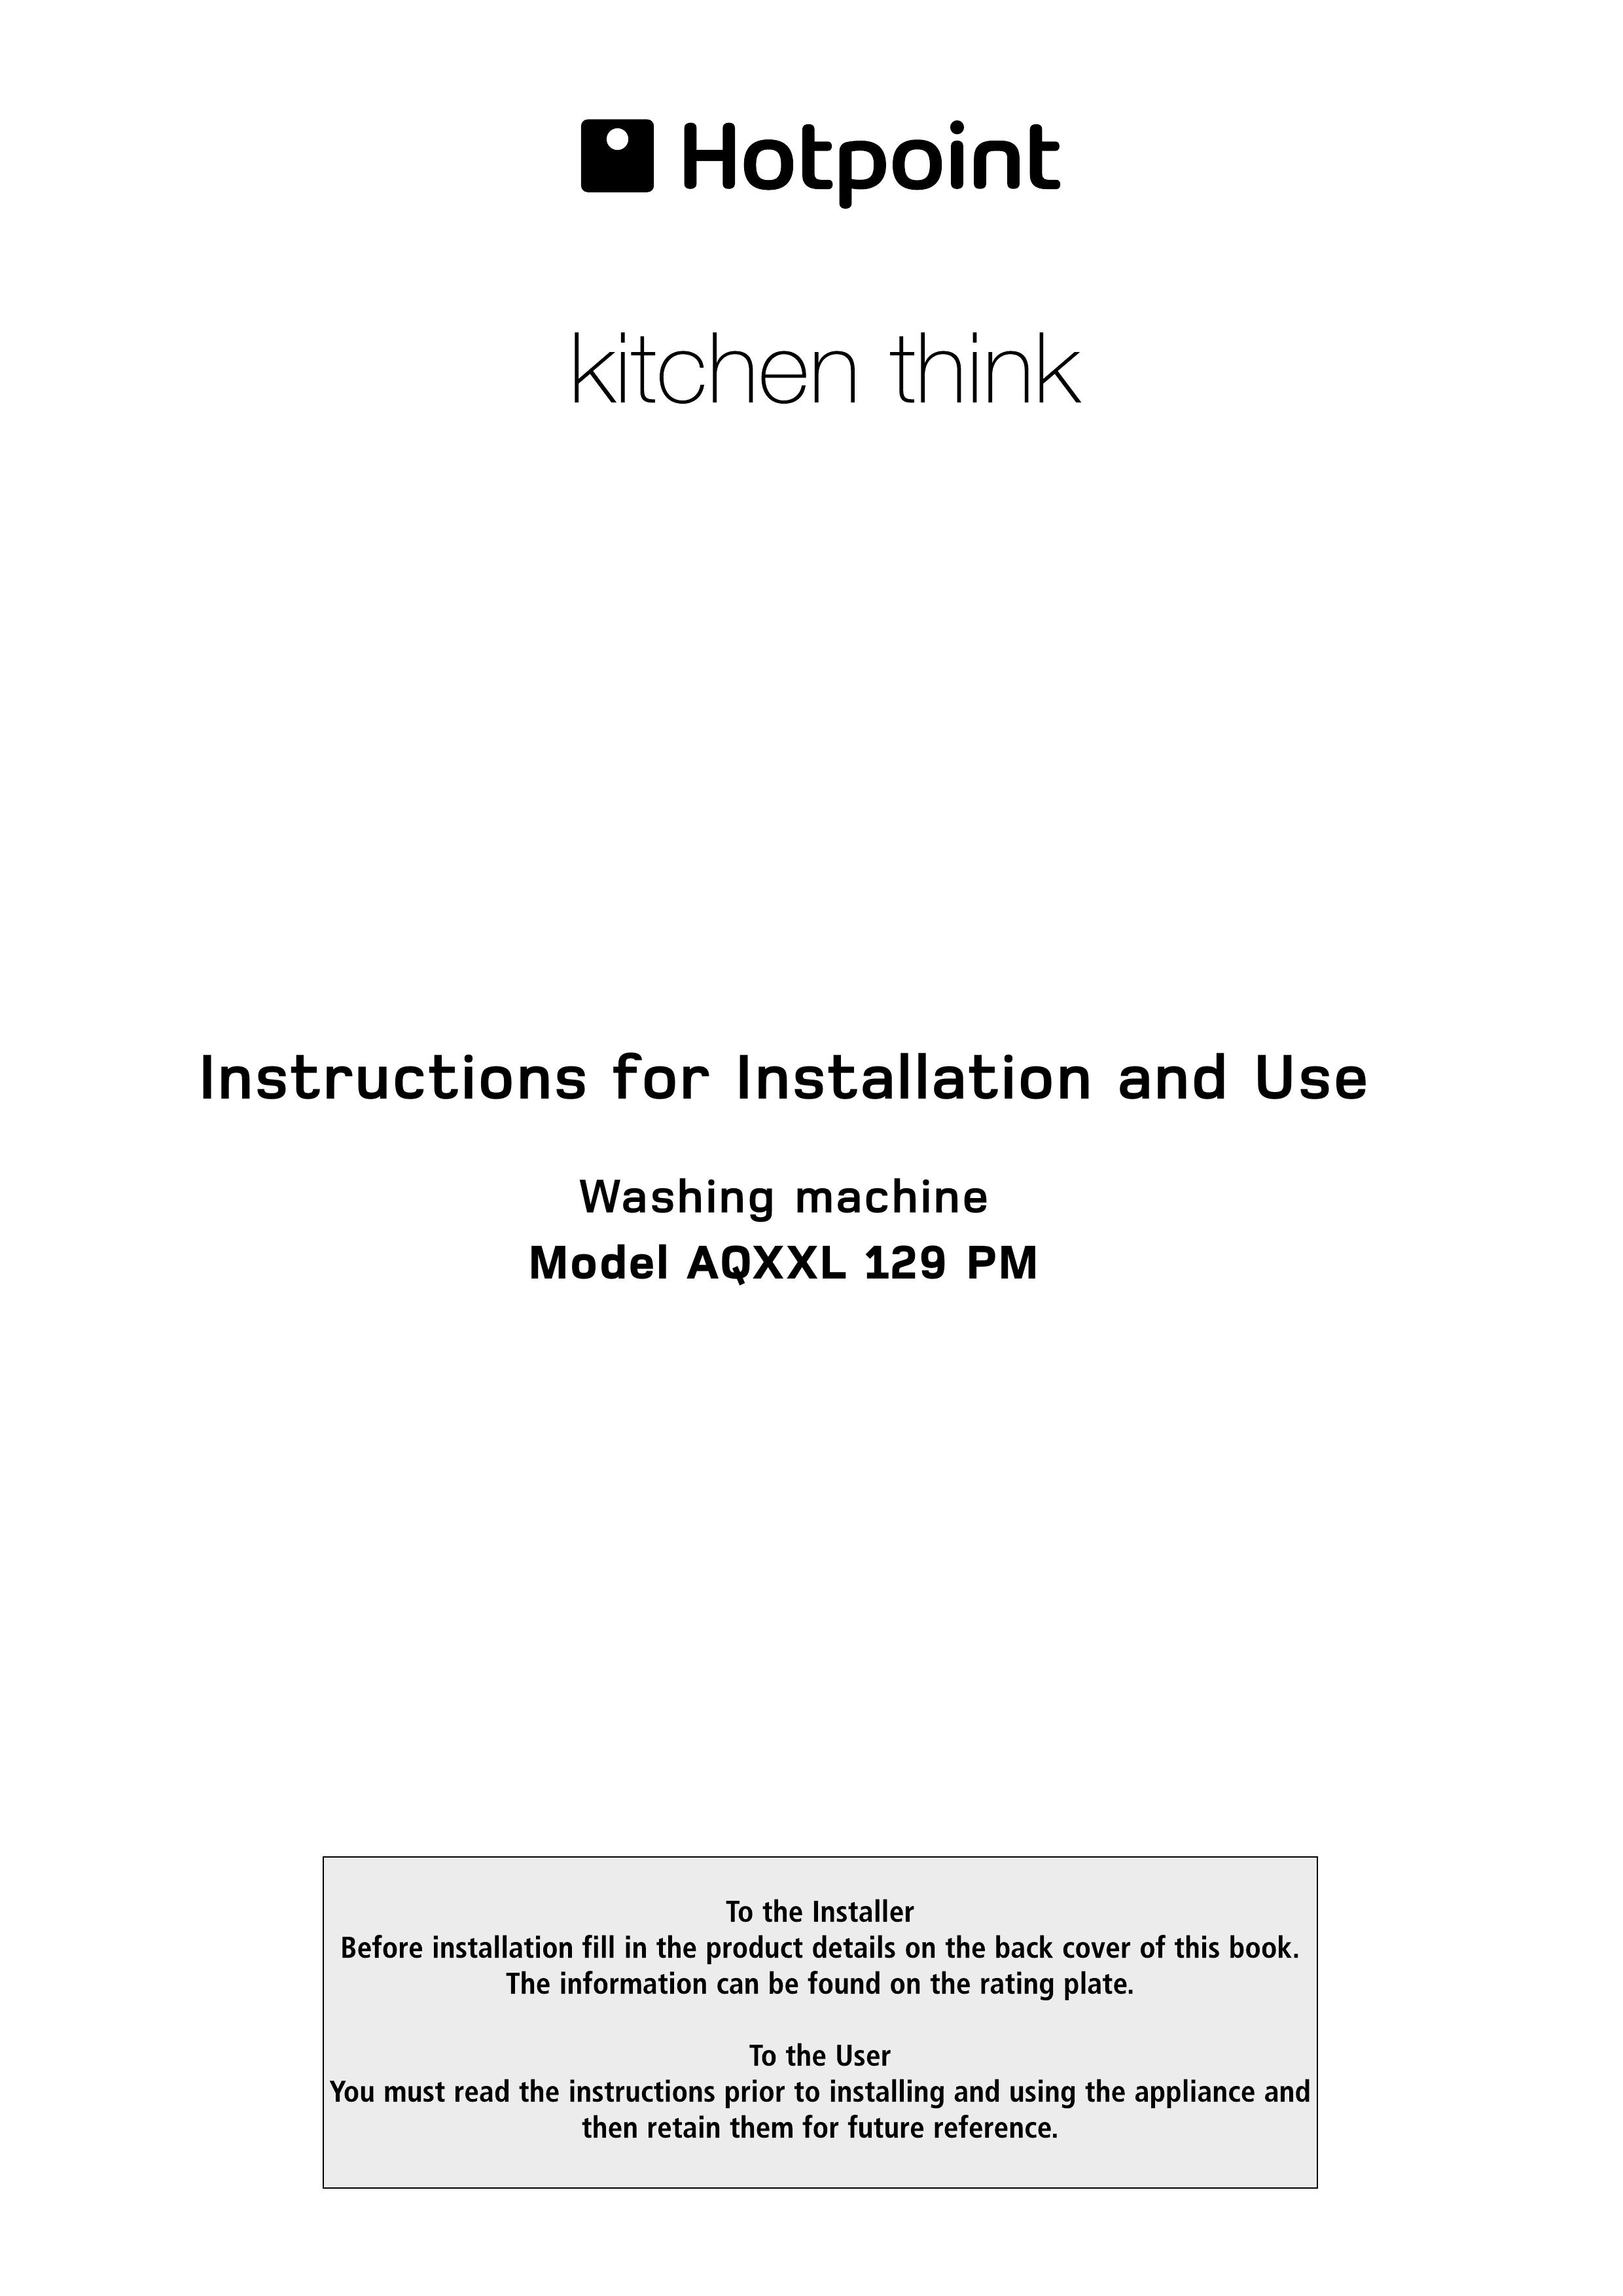 Hotpoint AQXXF 129 P Washer User Manual